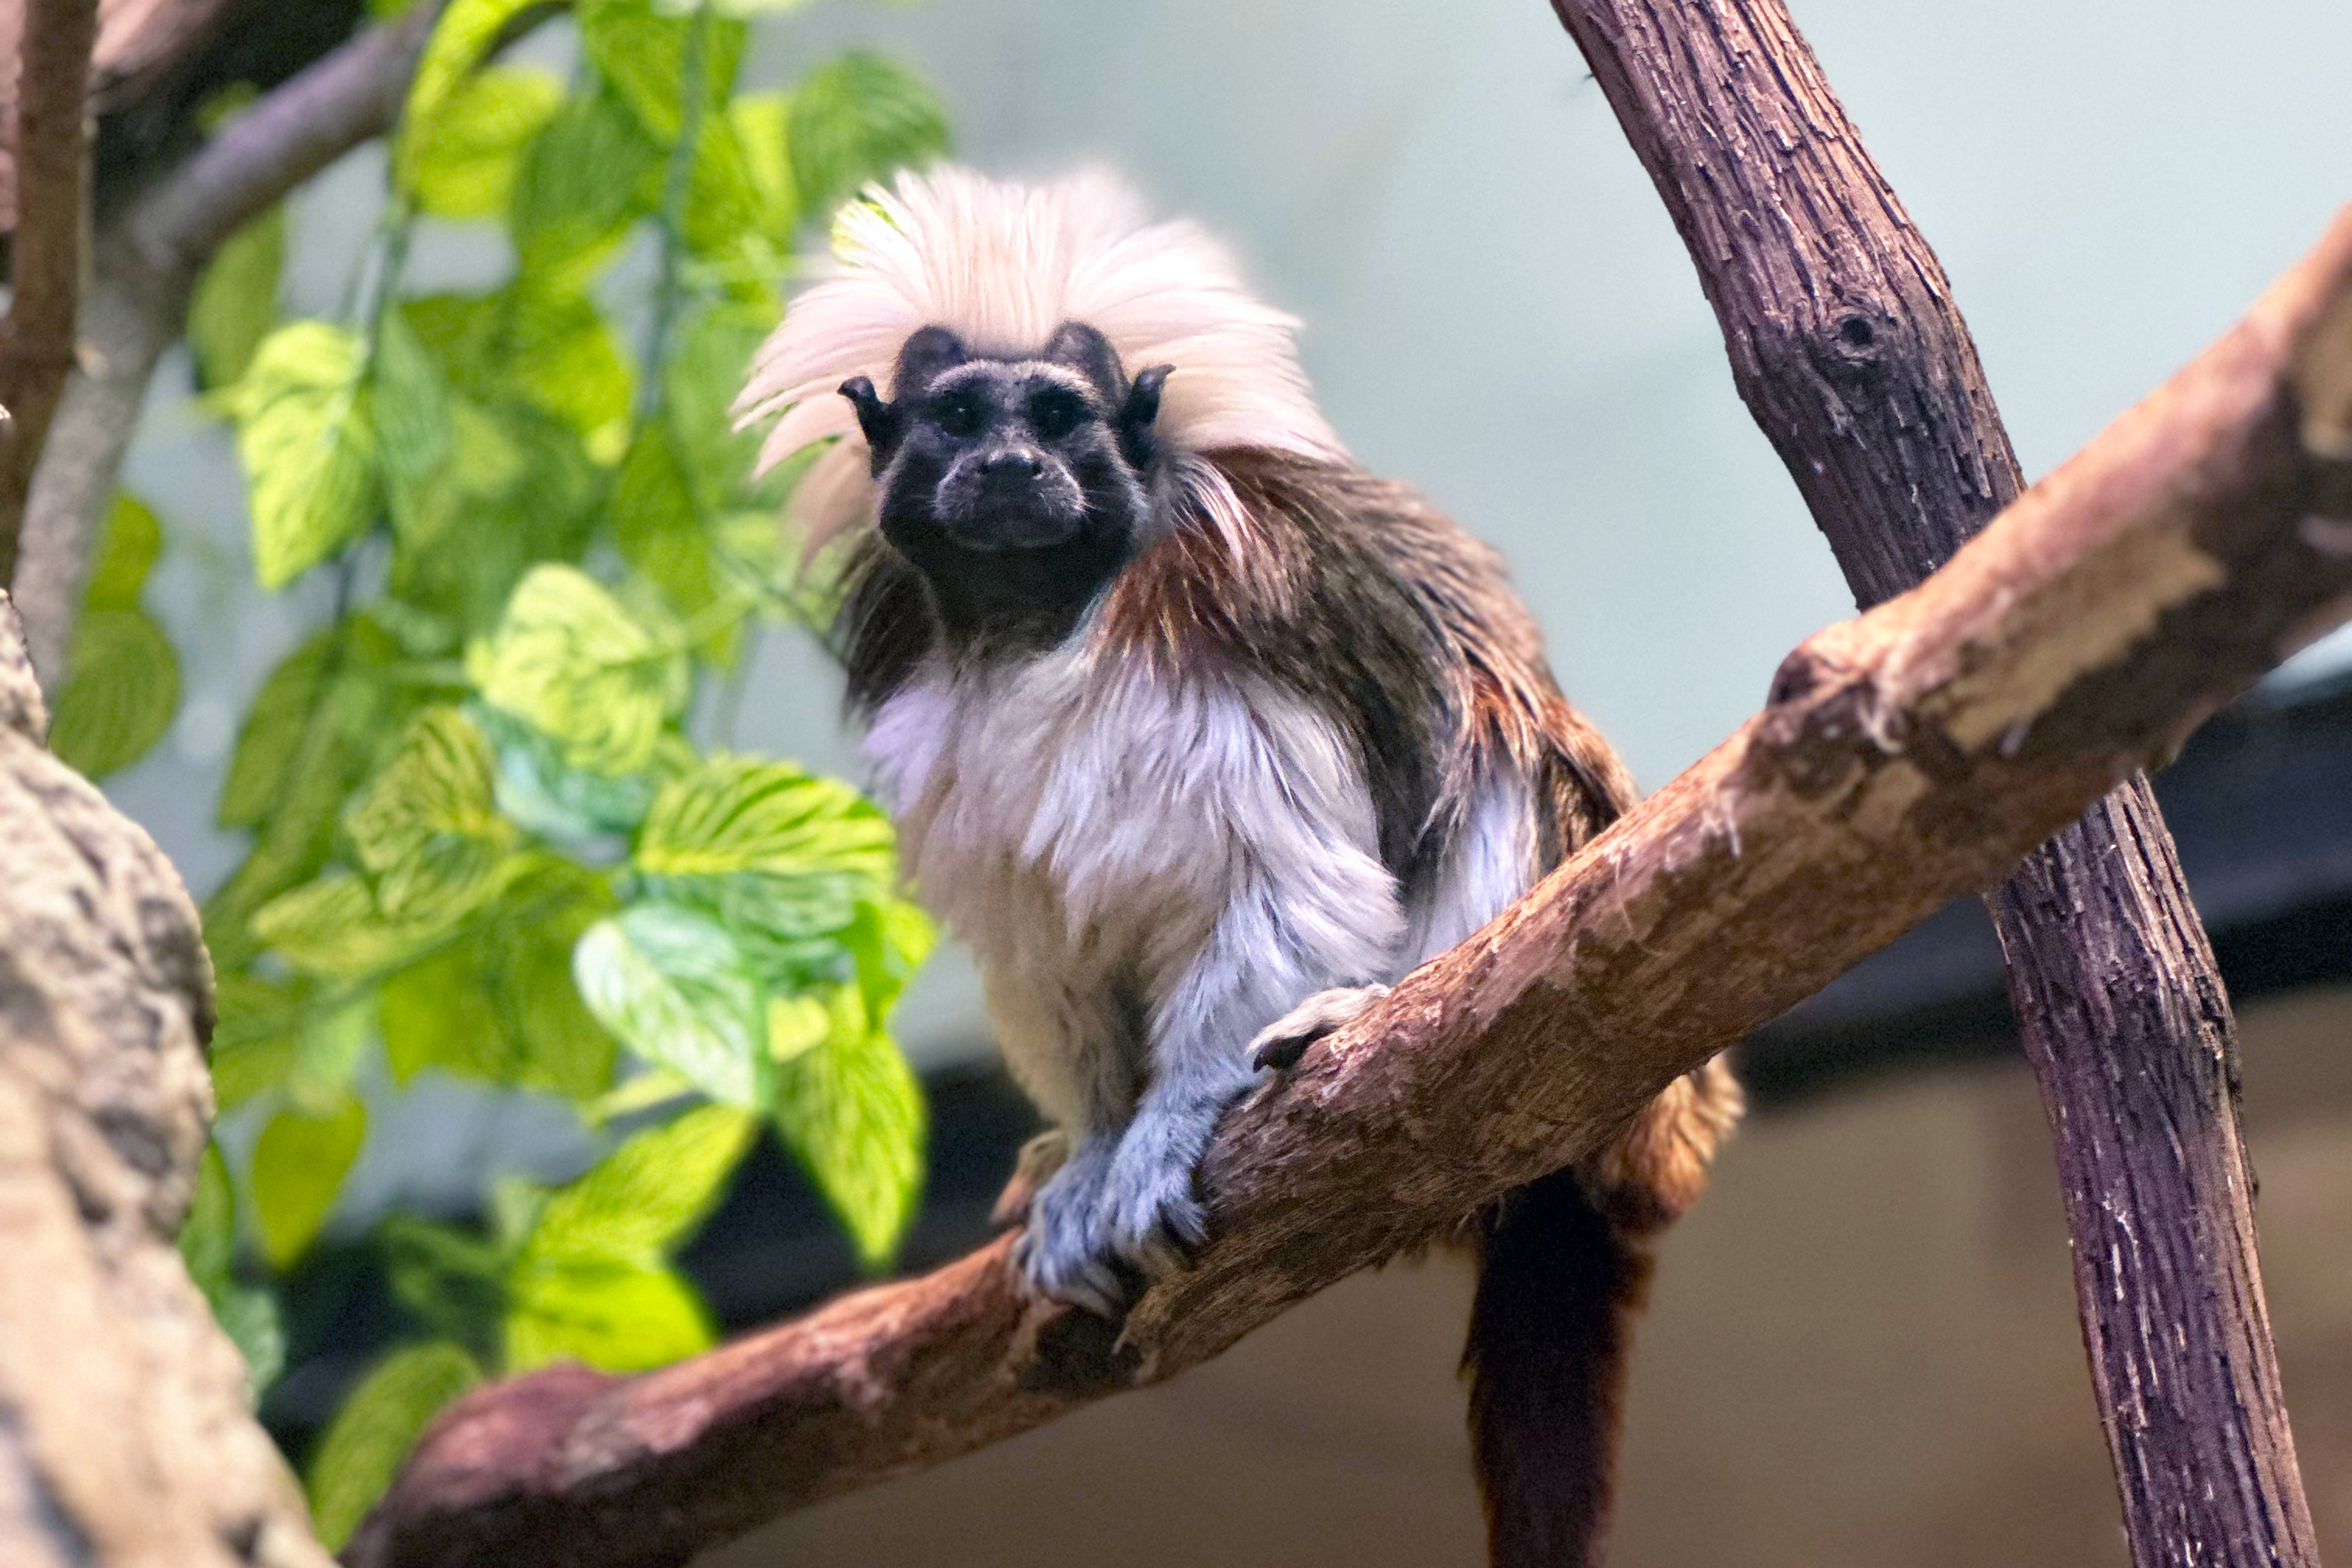 It has been 50 years since cotton-top tamarins—known for their signature white coif—have lived at NZCBI. Photo 2 credit: Kenton Kerns, Smithsonian’s National Zoo and Conservation Biology Institute